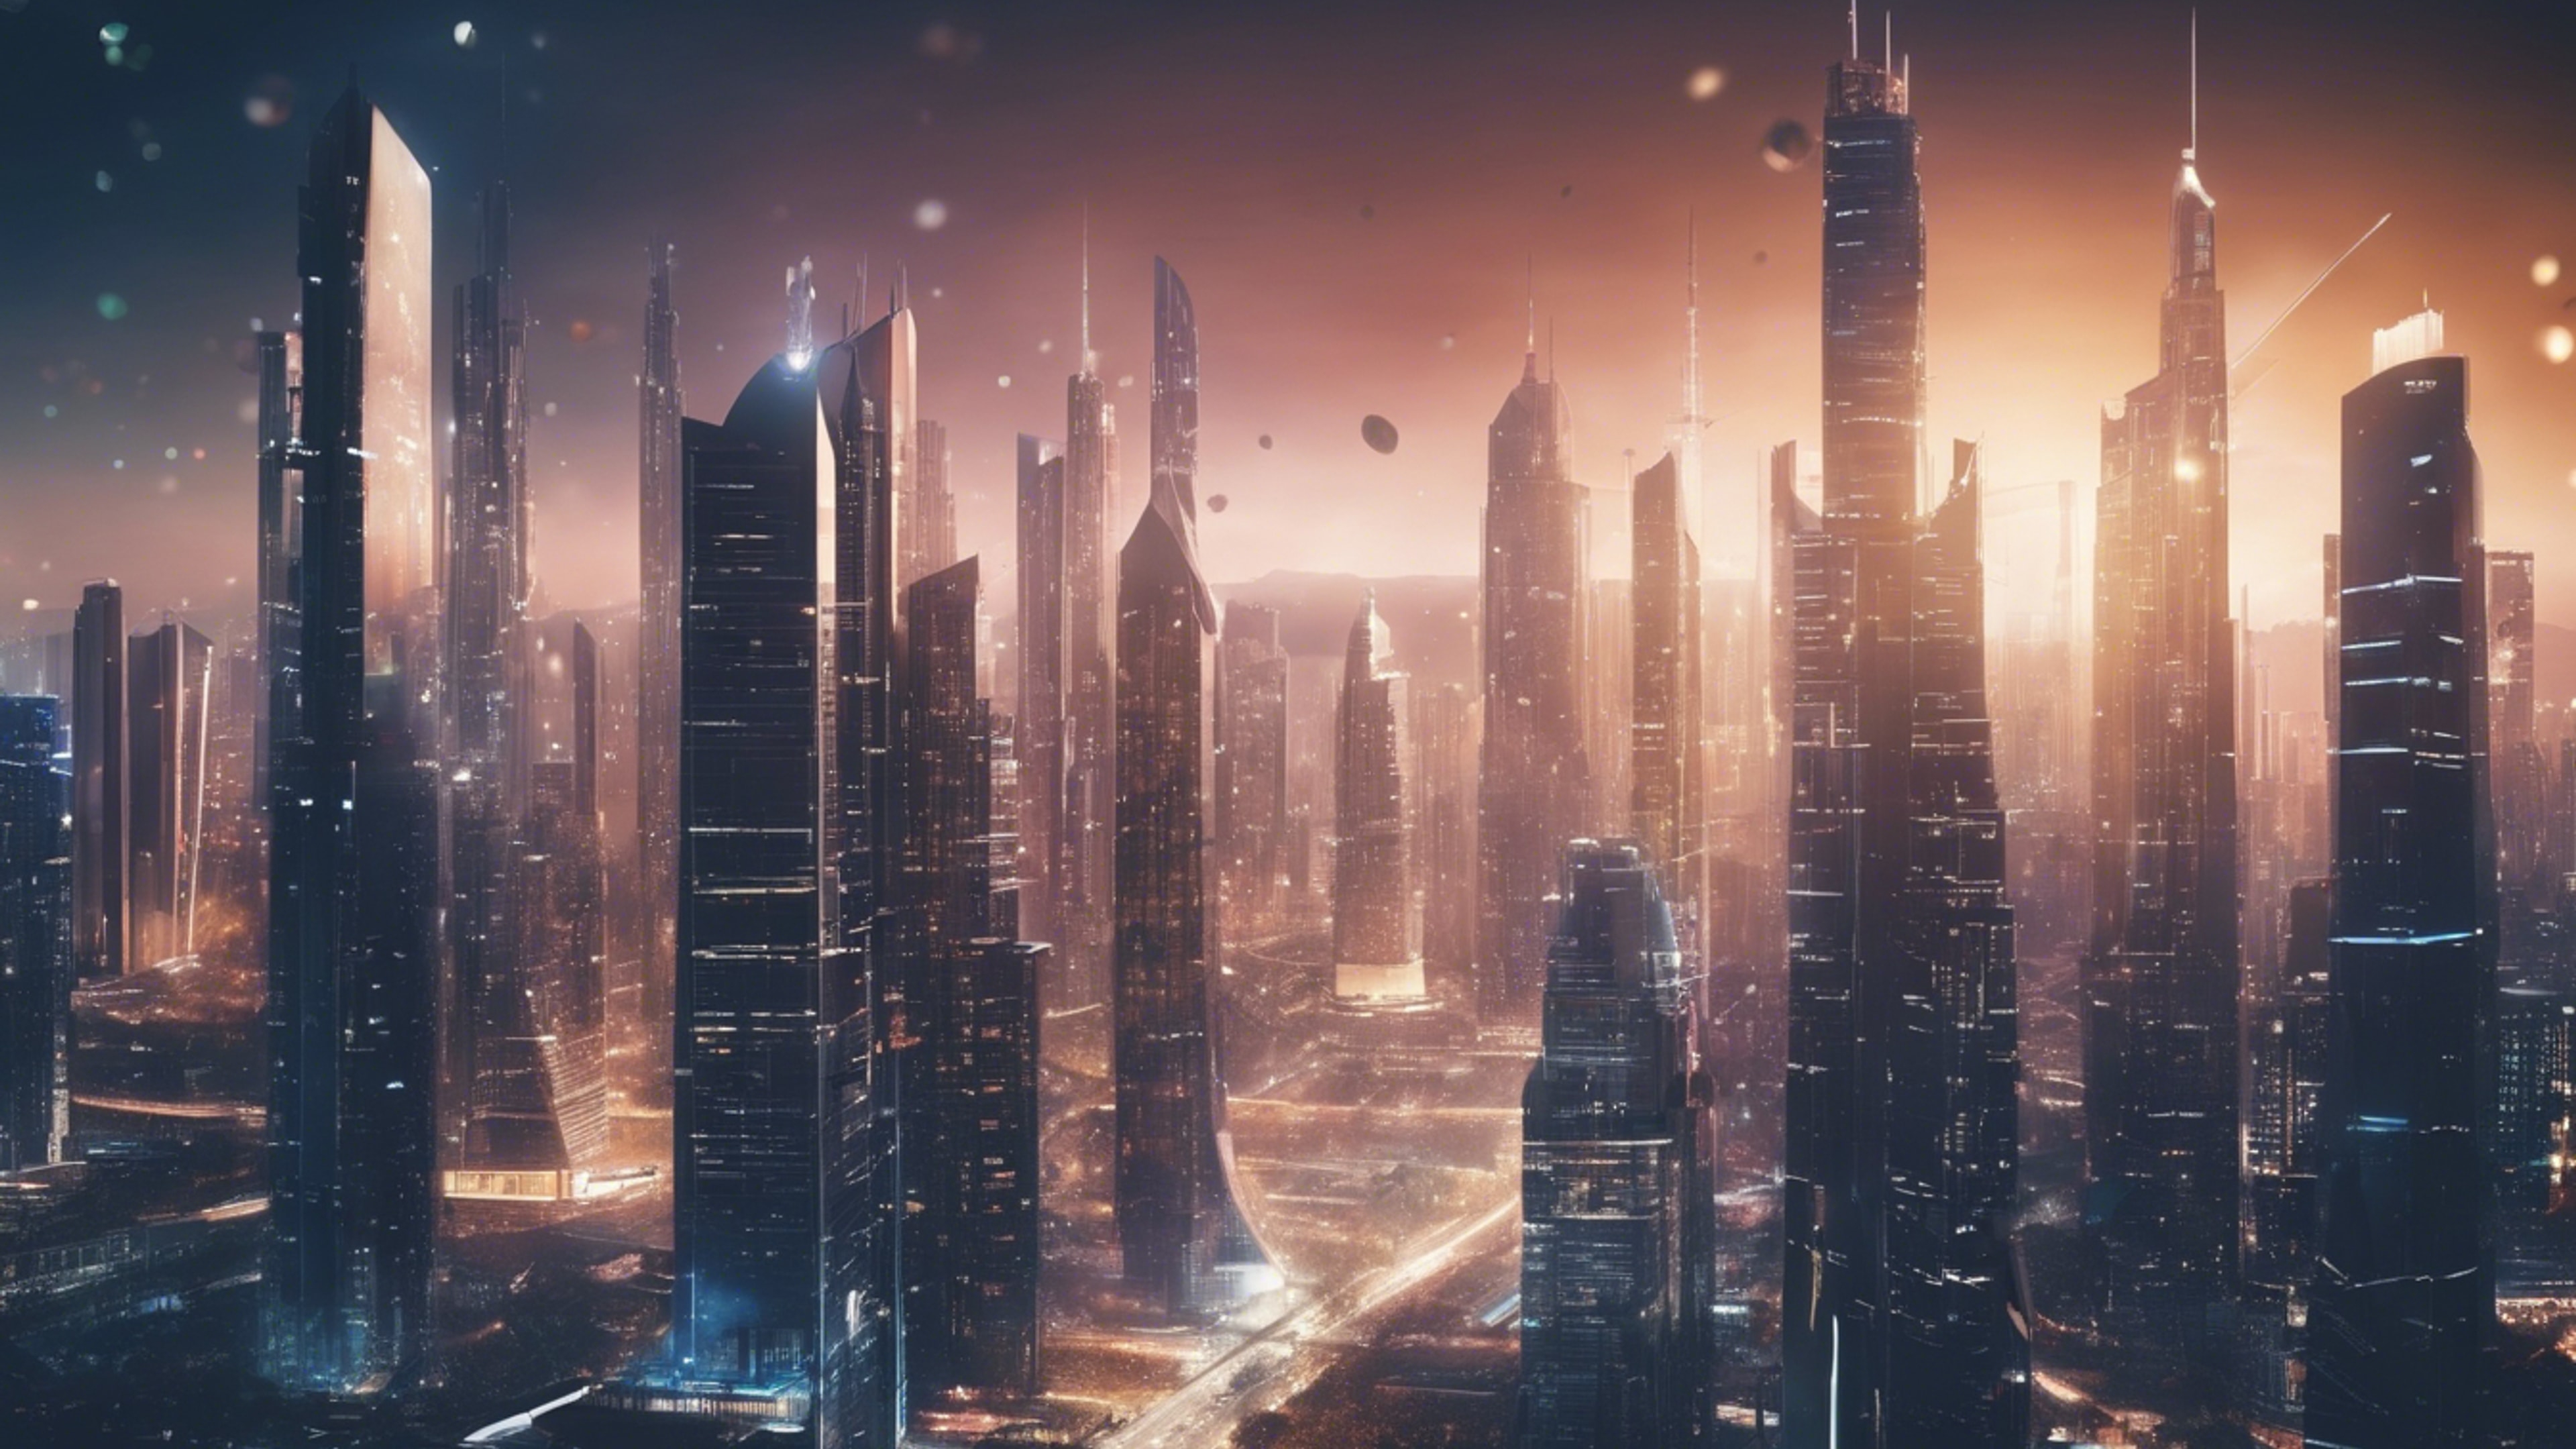 A detailed illustration of a megalopolis skyline with futuristic, AI-designed structures. Wallpaper[5acce17a495b4f288757]